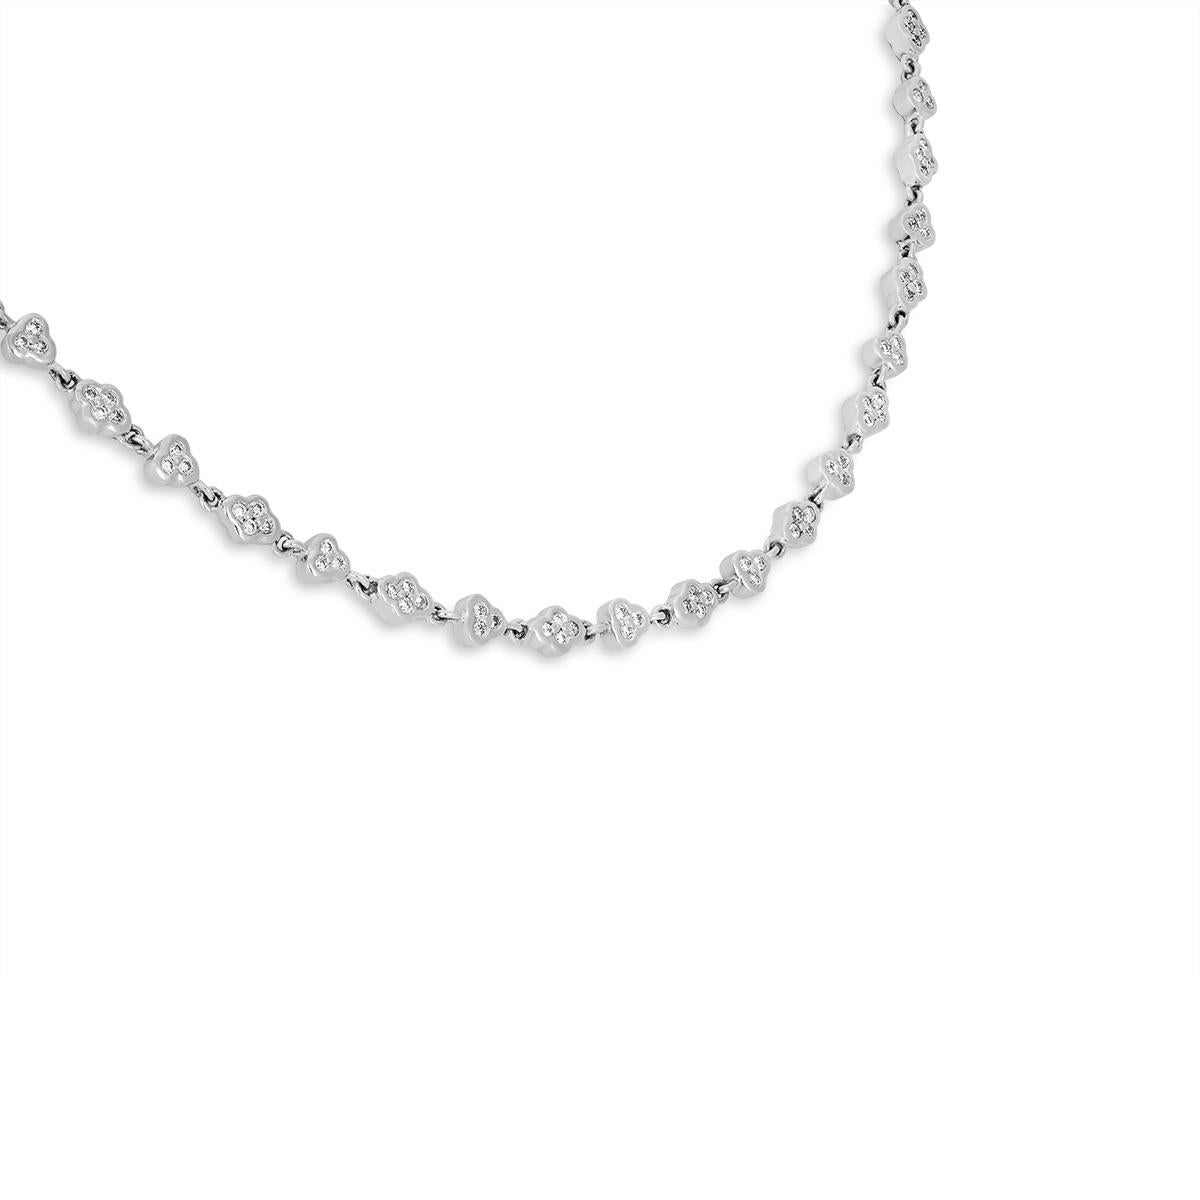 An elegant platinum diamond necklace. The necklace features stations alternating between 3 and 4 round brilliant cut diamonds with a high polish surround. There are 406 round brilliant cut diamonds set throughout the chain with an approximate total